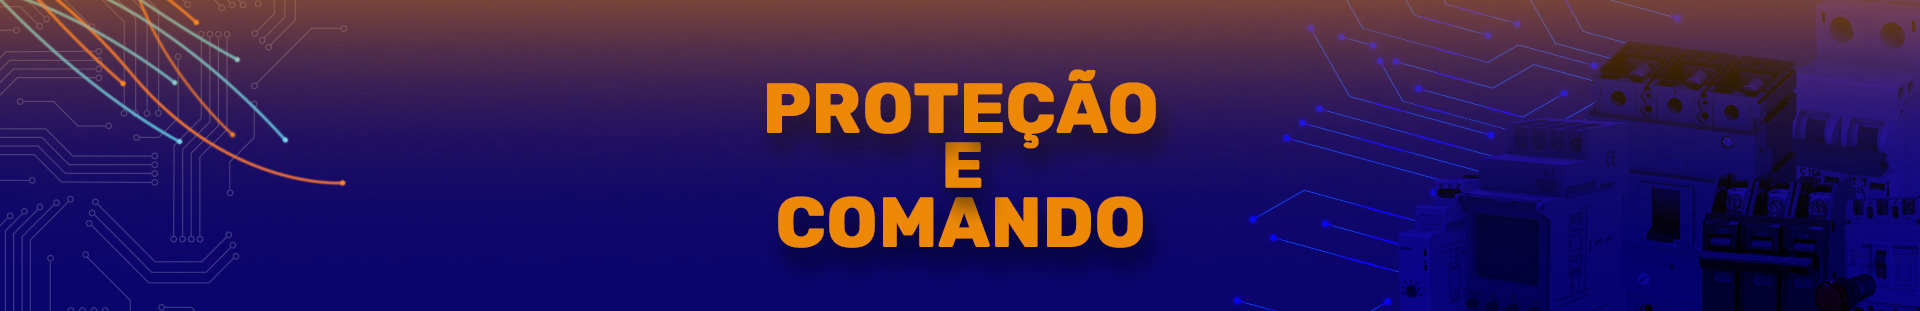 banner-protecao